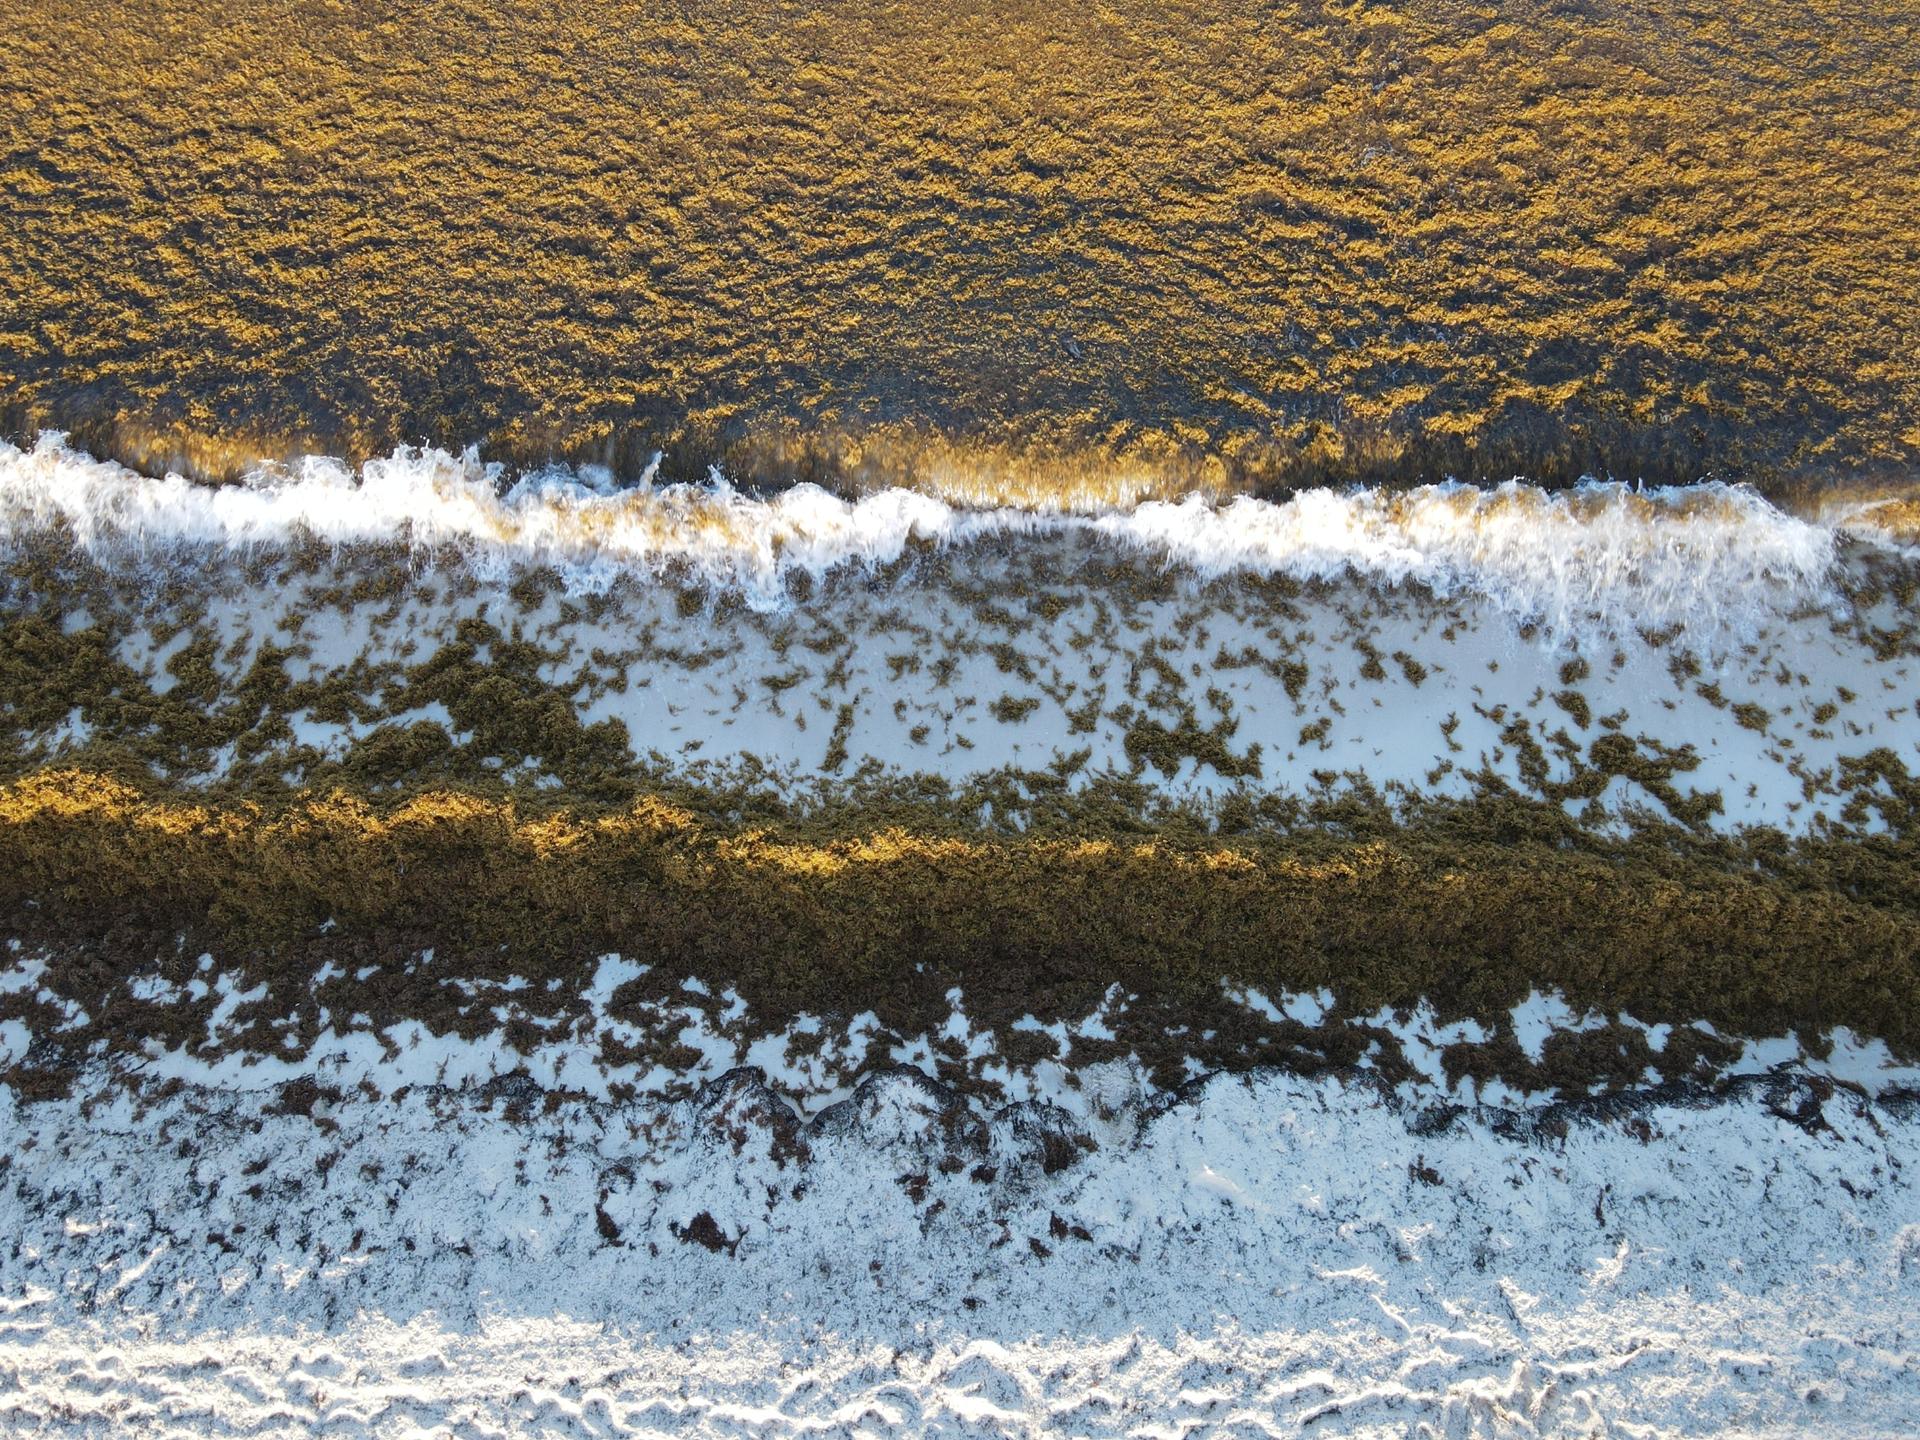 Sargassum accumulates in huge heaps along the coast in Cancun as seen in this drone footage. 